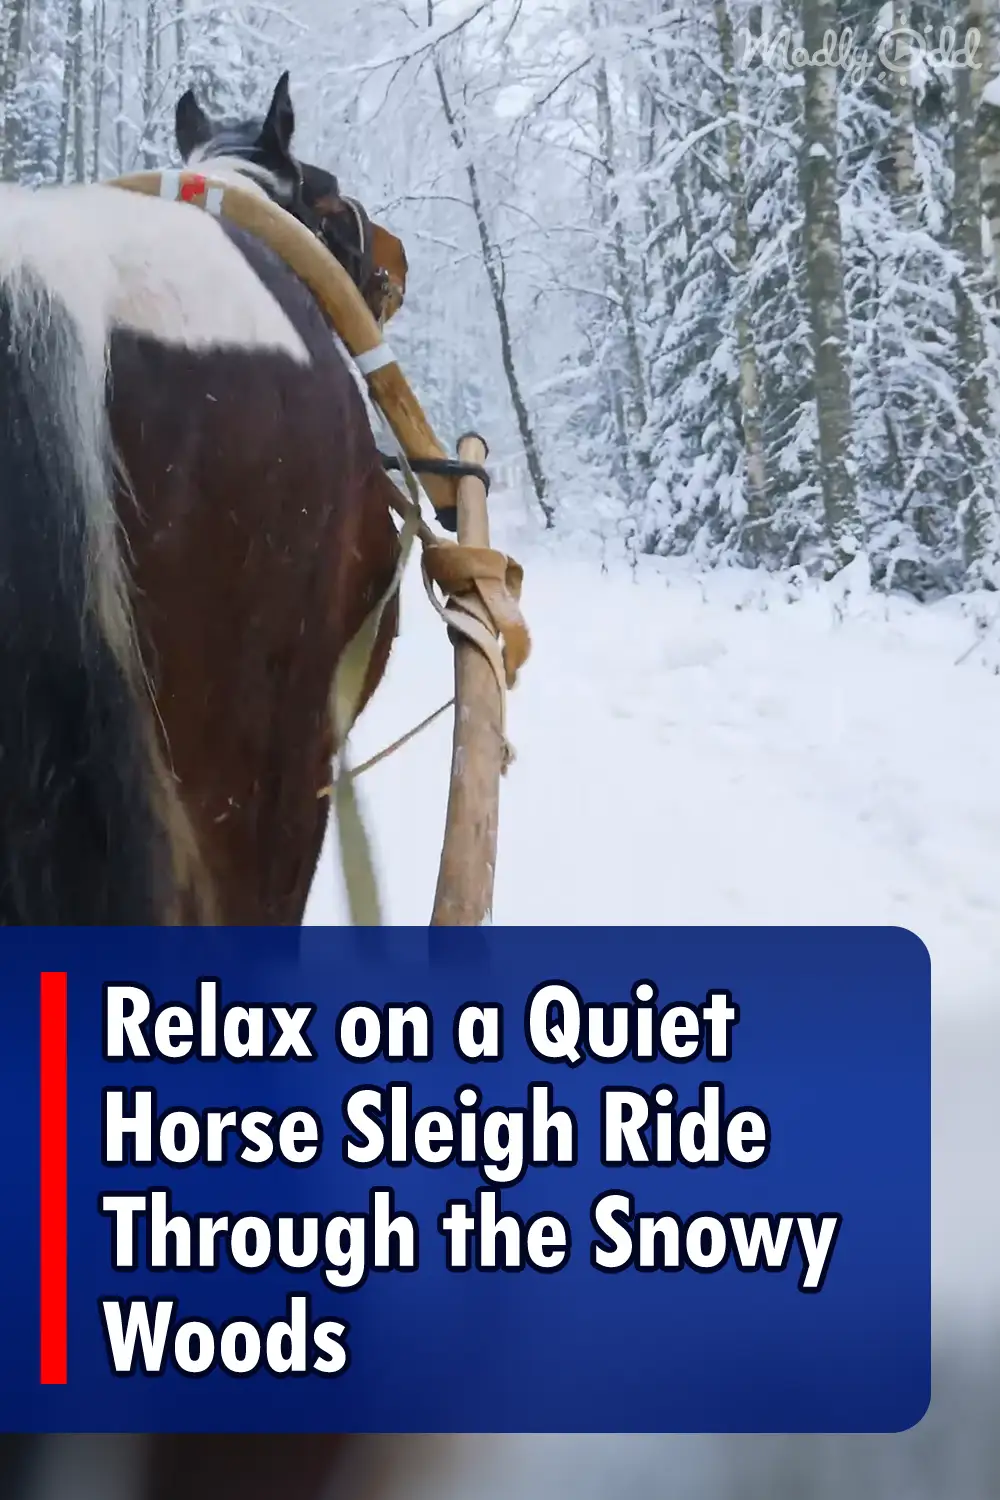 Relax on a Quiet Horse Sleigh Ride Through the Snowy Woods